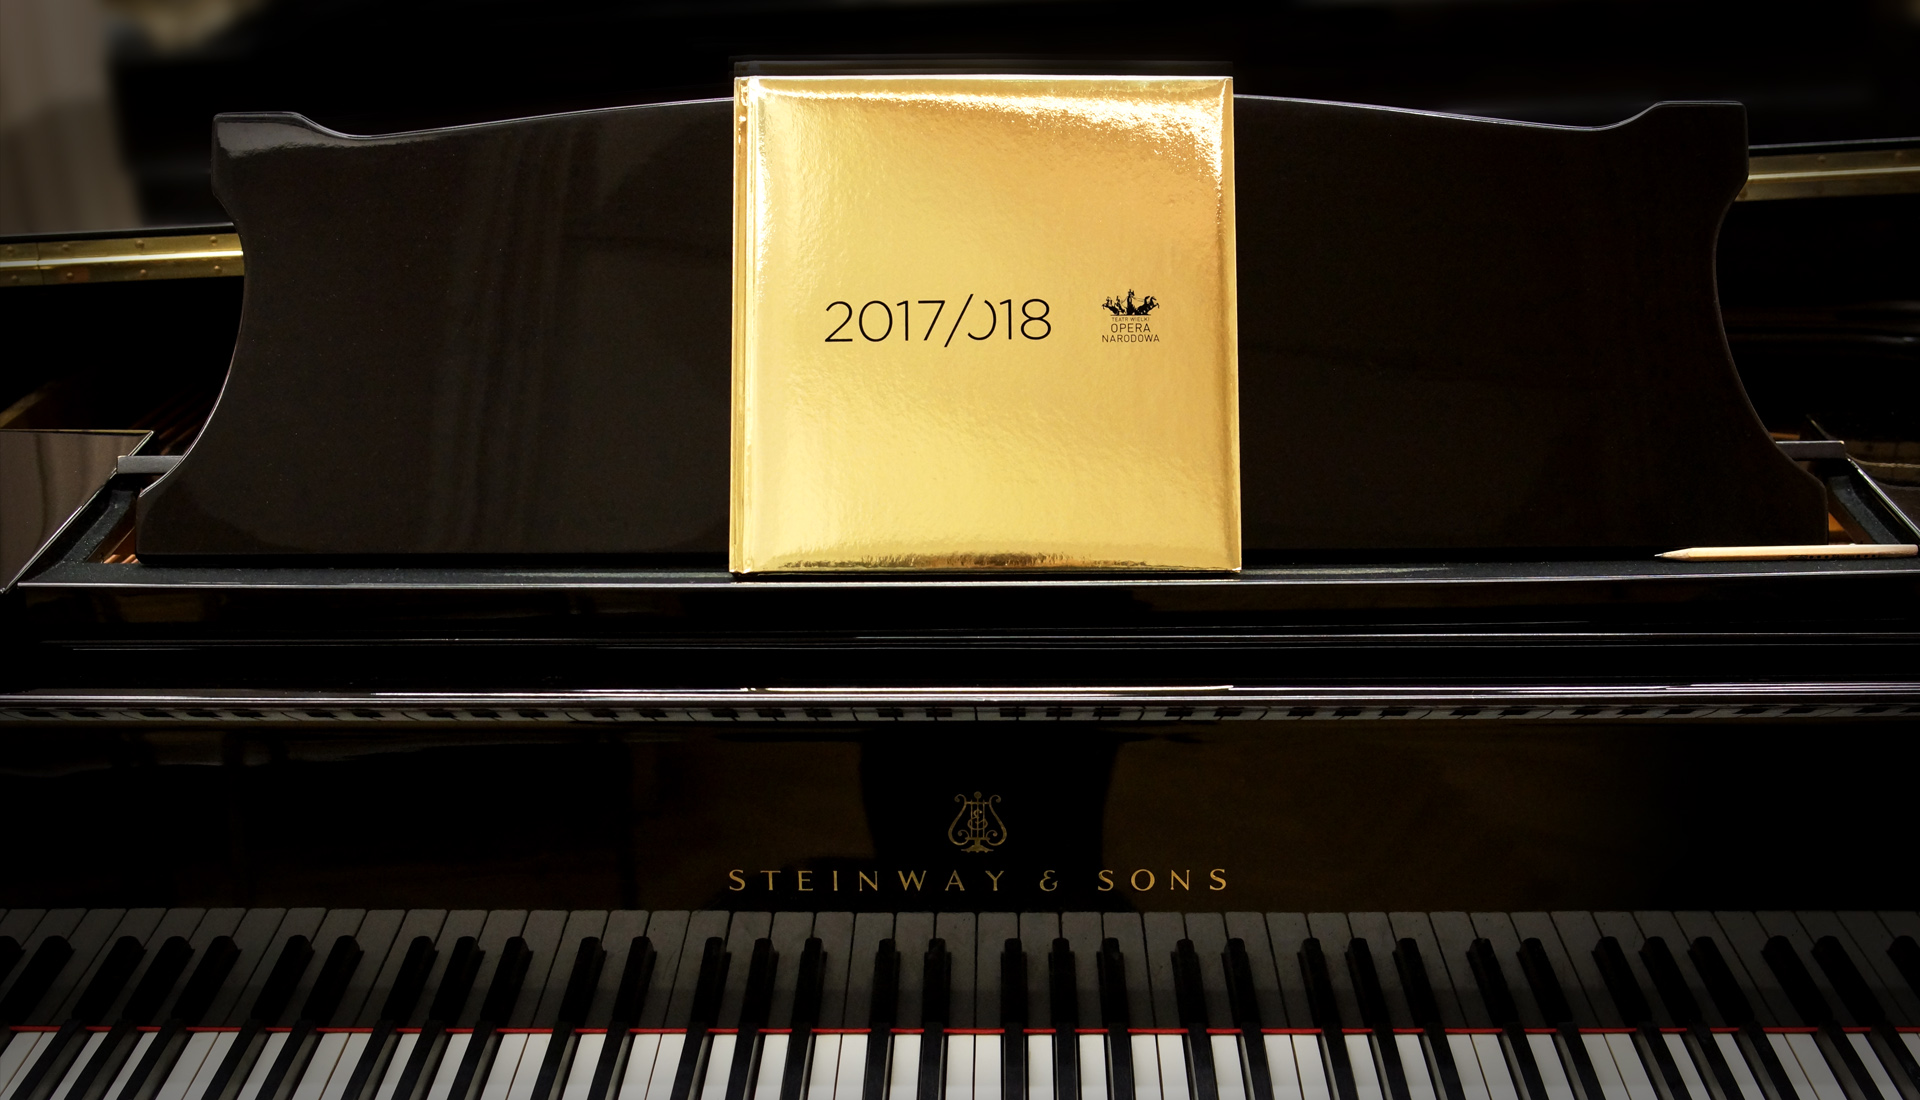 Pictured: Gold-bound book propped on a piano